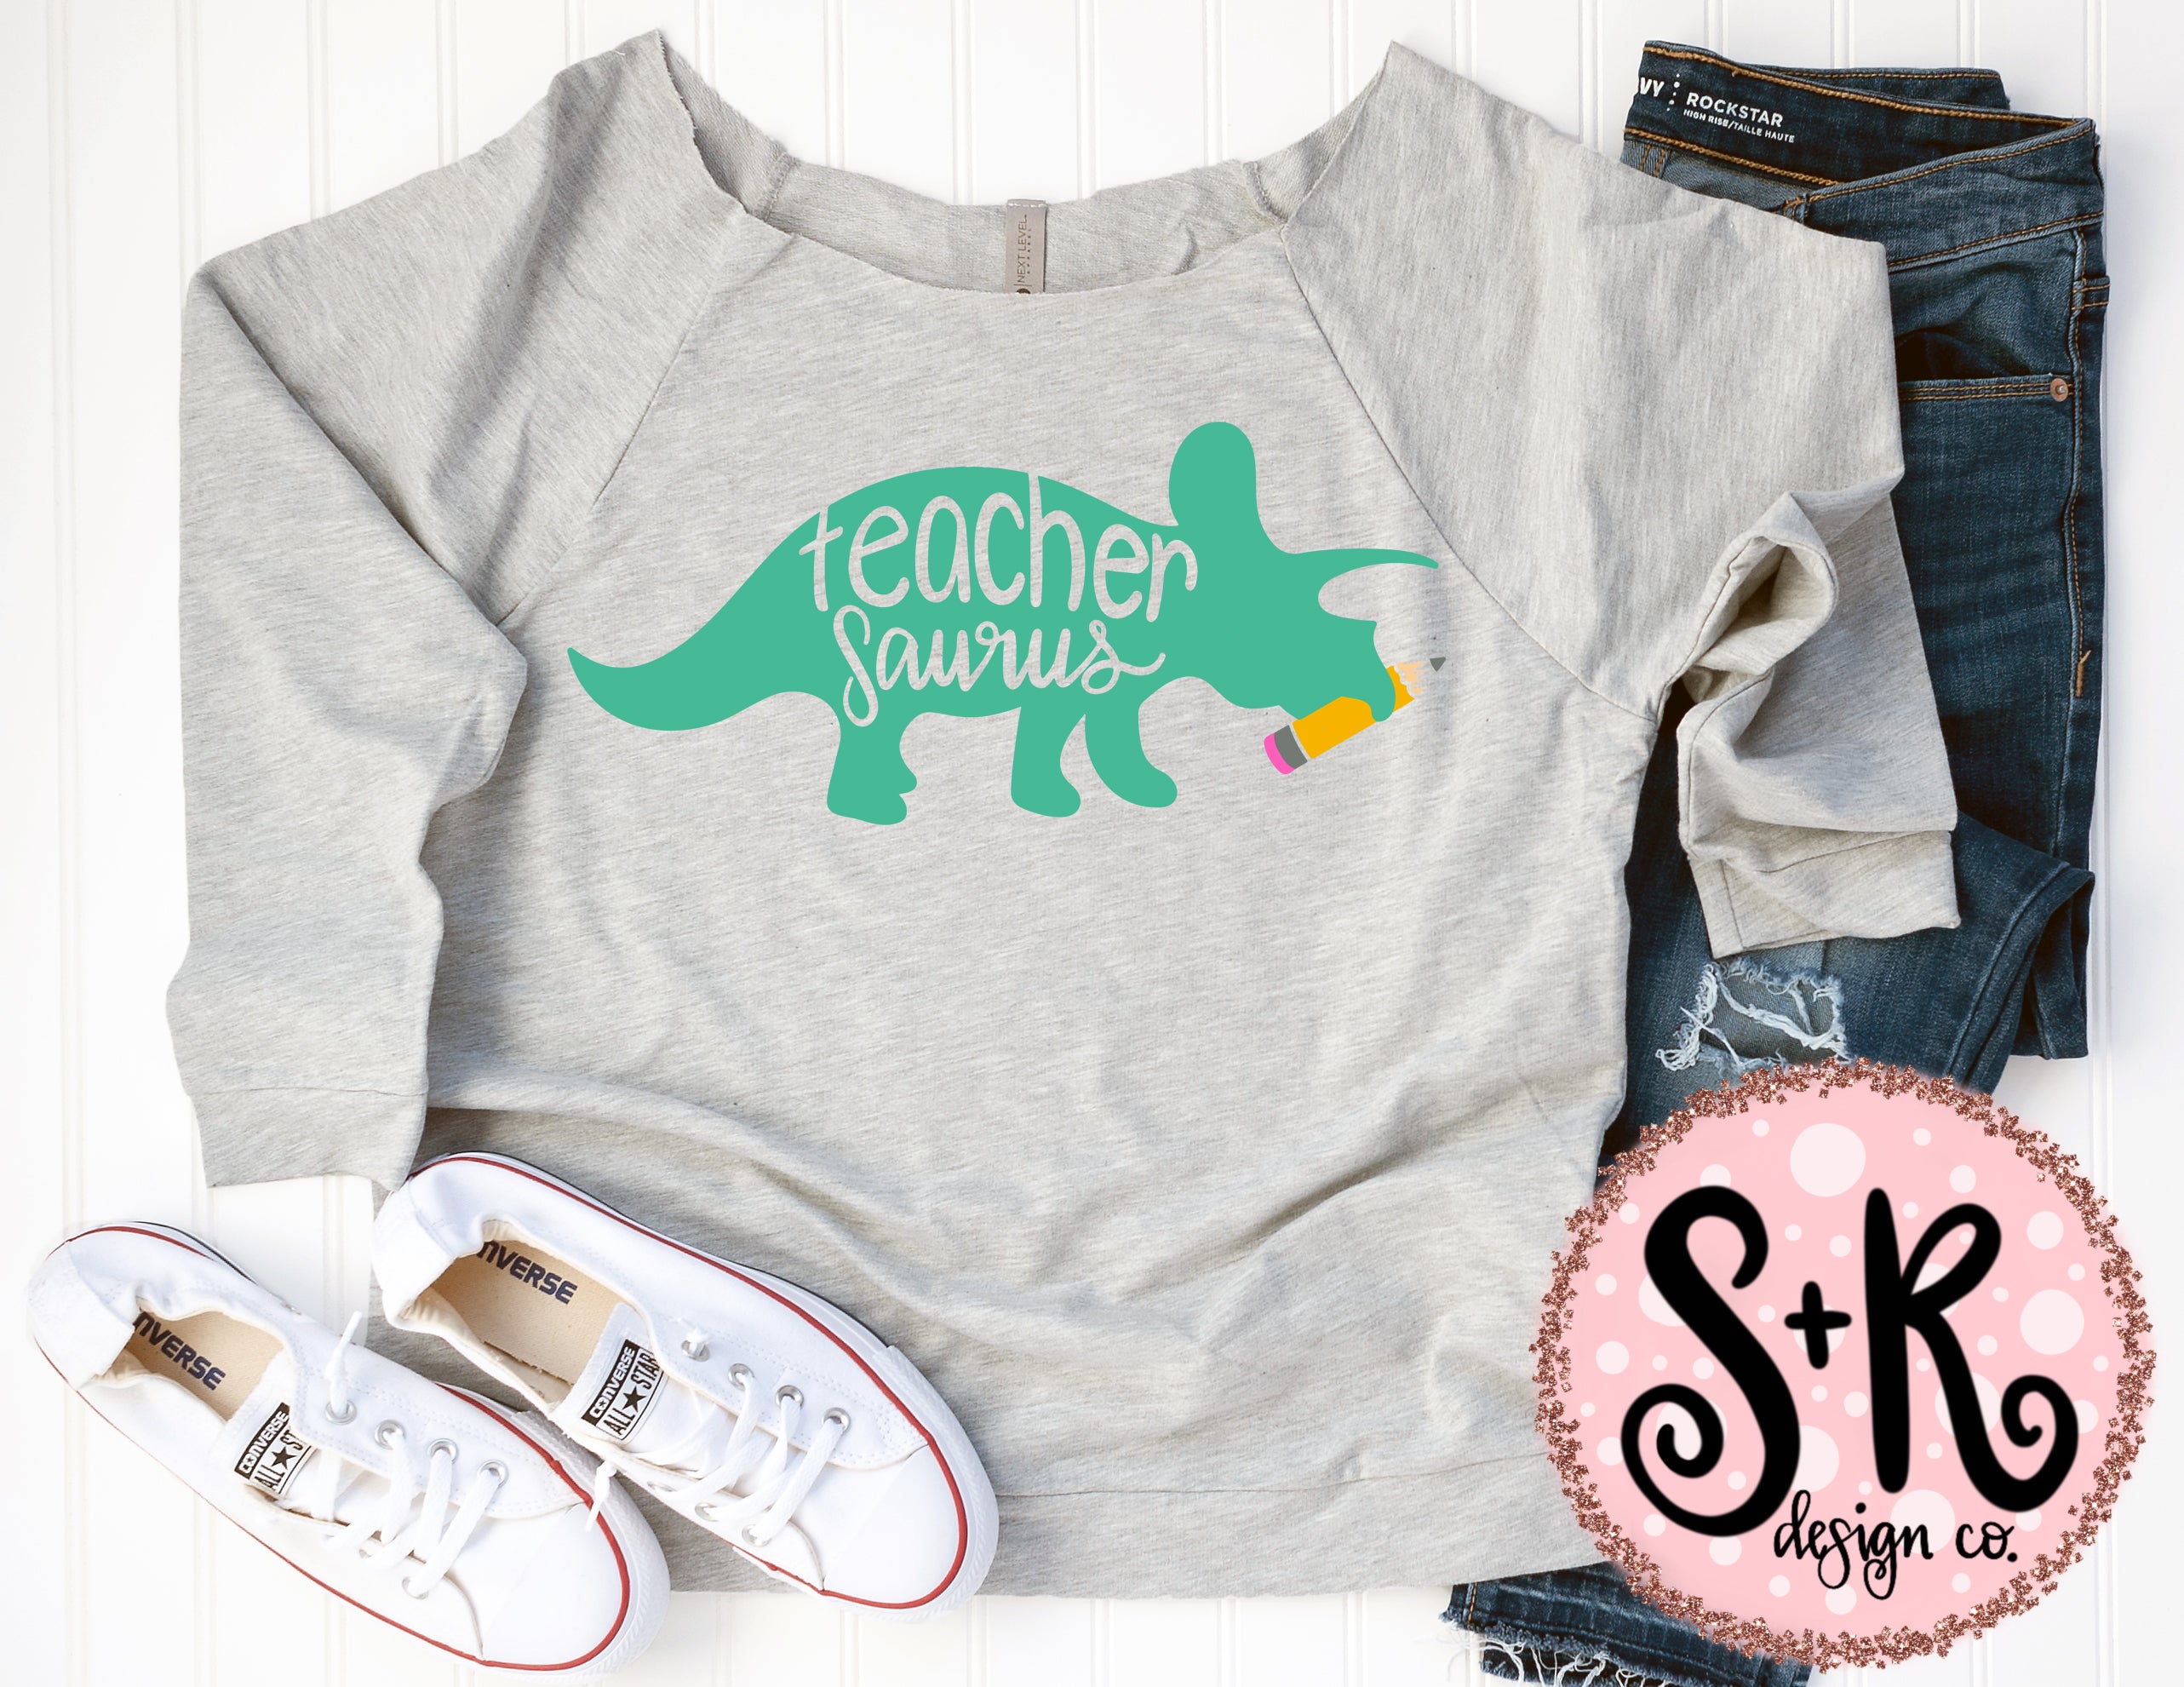 Download Teacher Saurus Svg Dxf Png 2019 Scout And Rose Design Co